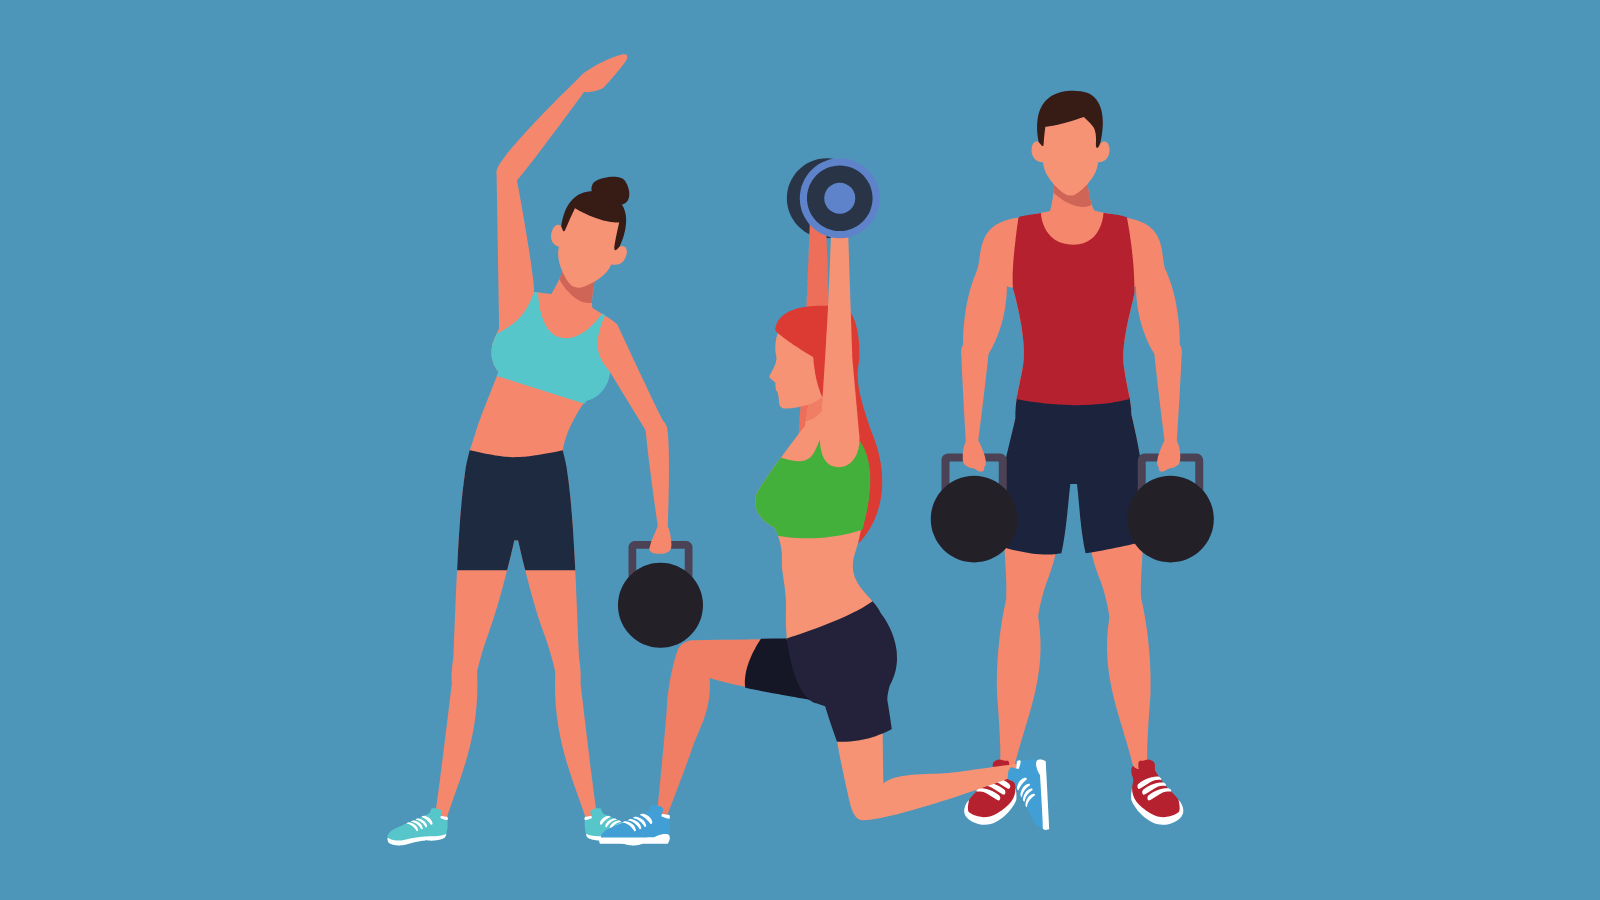 Three people lifting weights in various poses